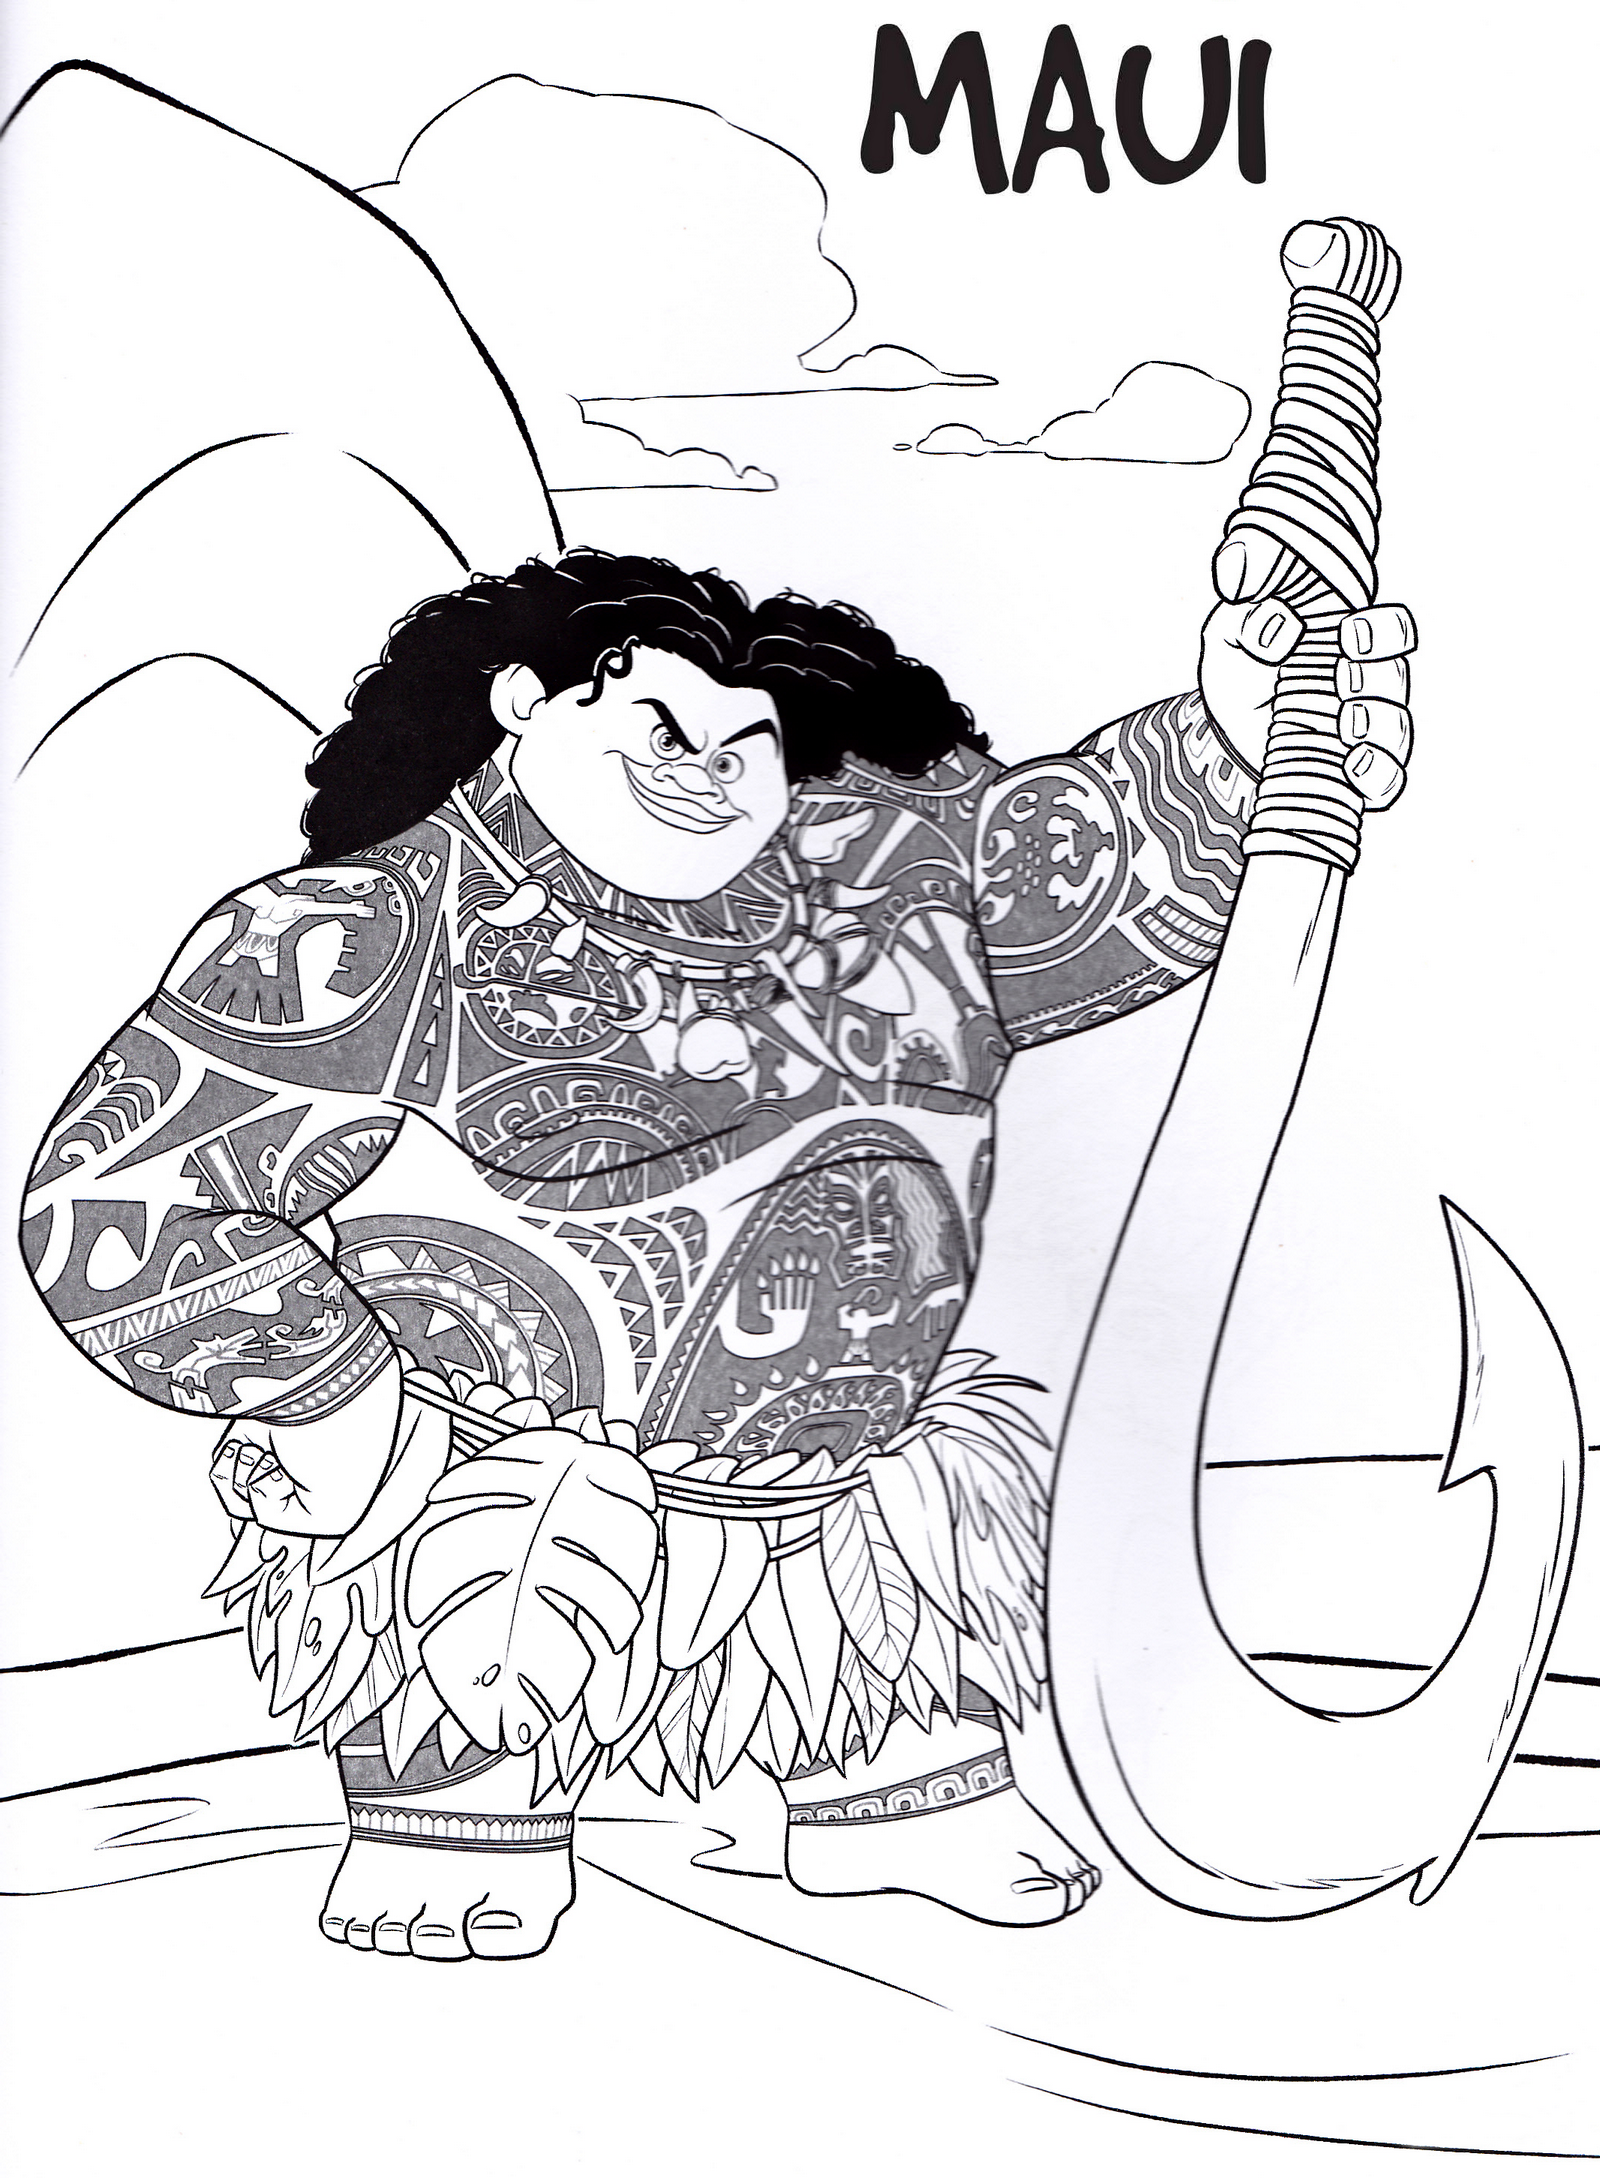 maui moana coloring pages